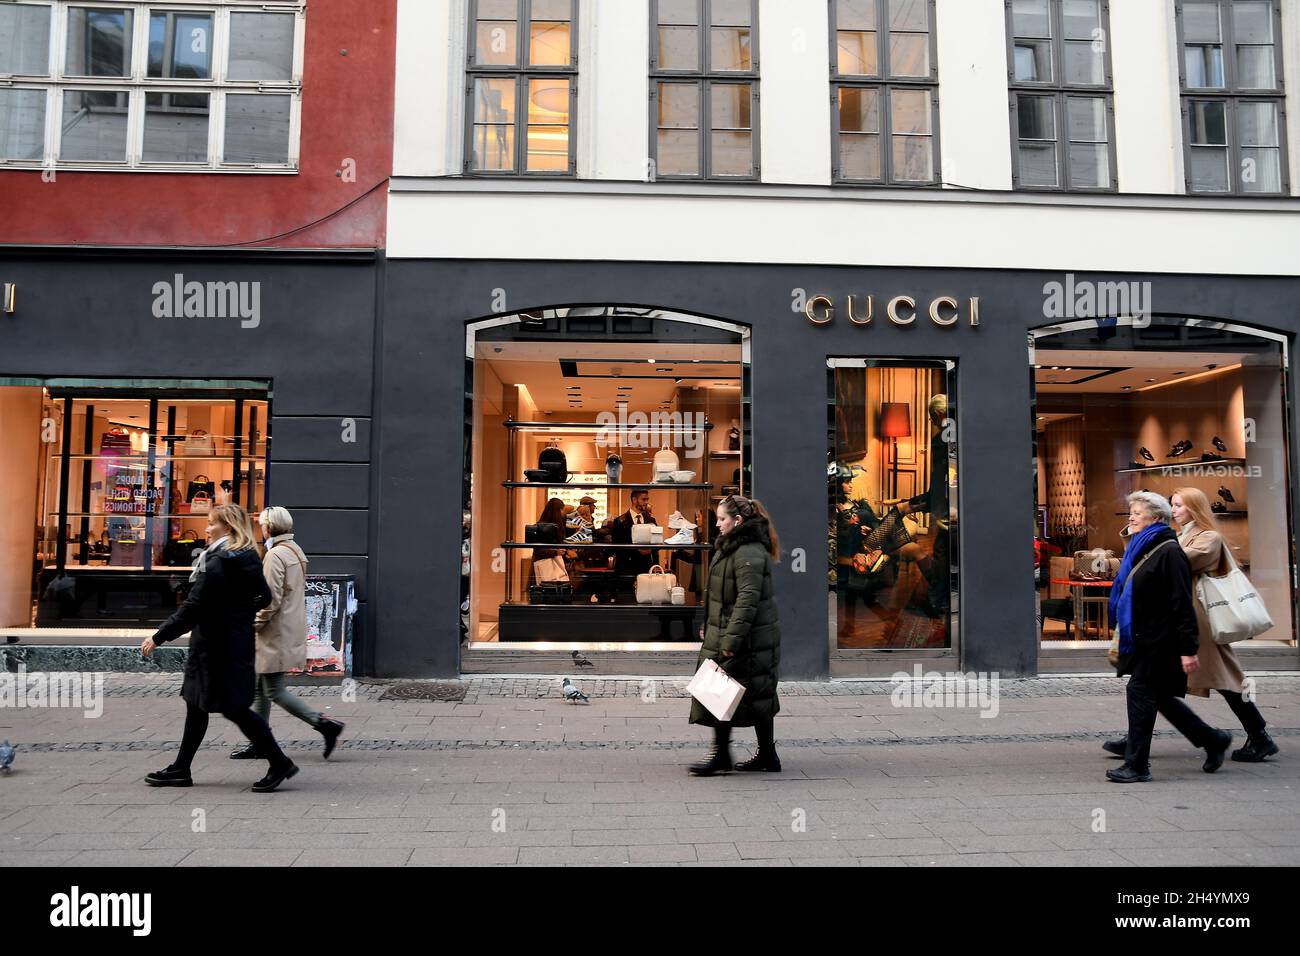 Gucci Store High Resolution Stock Photography and Images Alamy